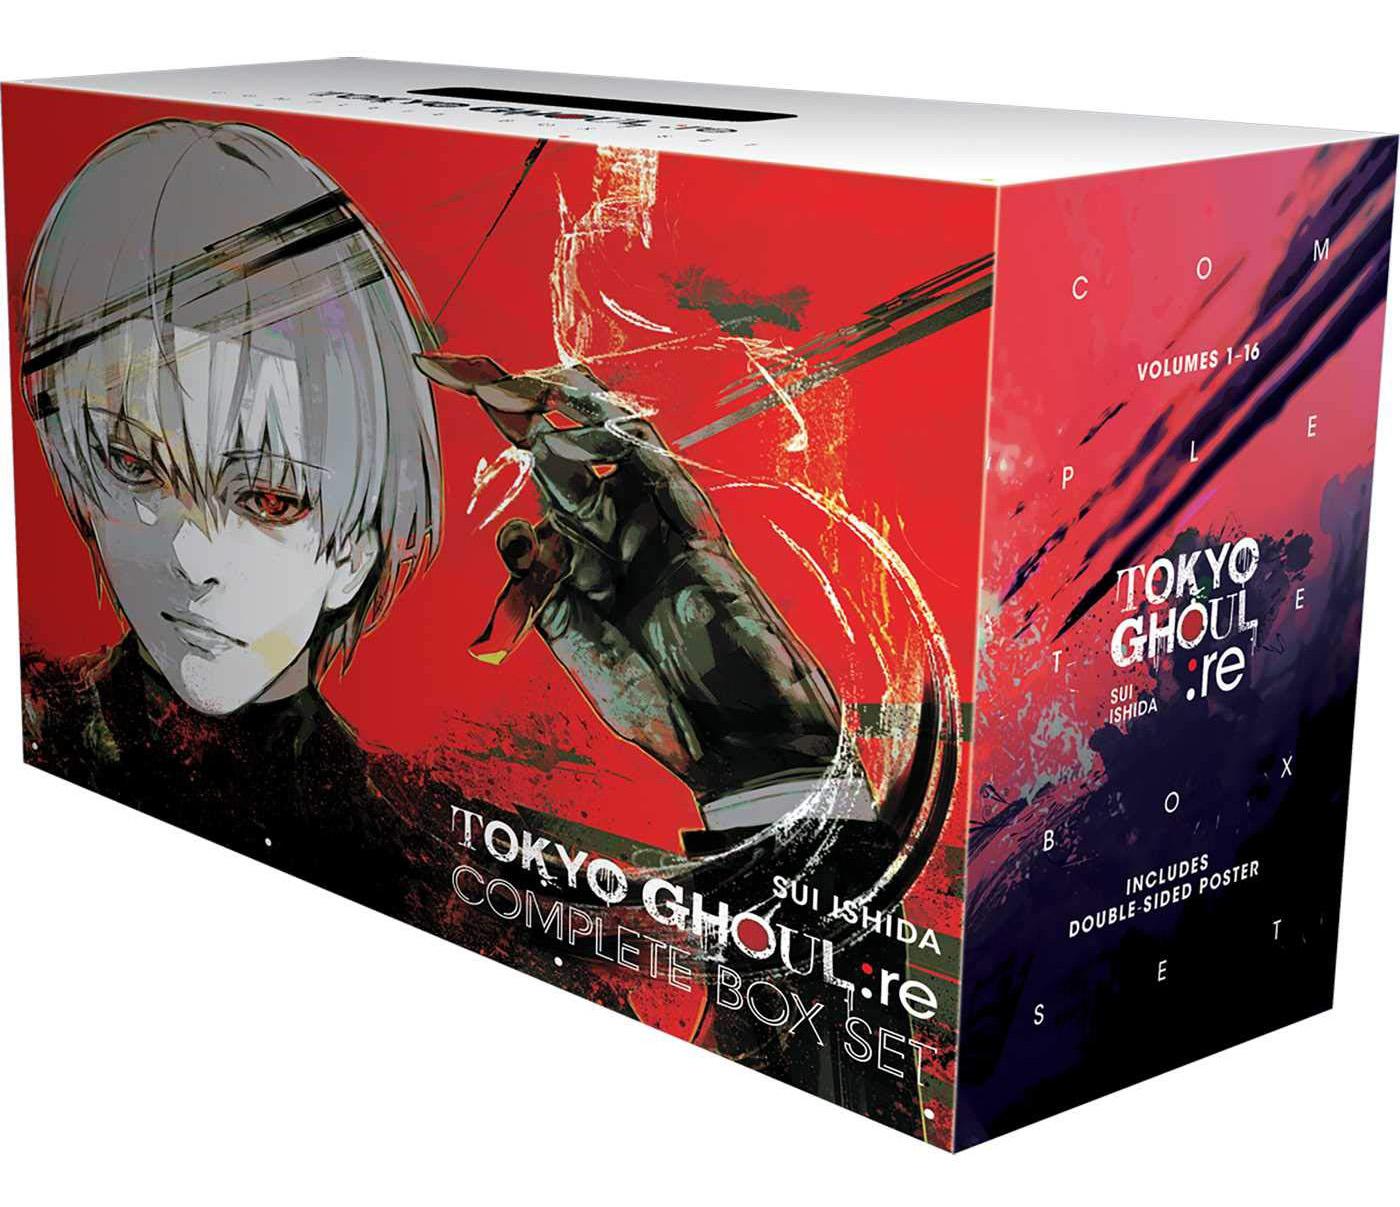 Tokyo Ghoul re Complete Box Set for $75.99 Shipped